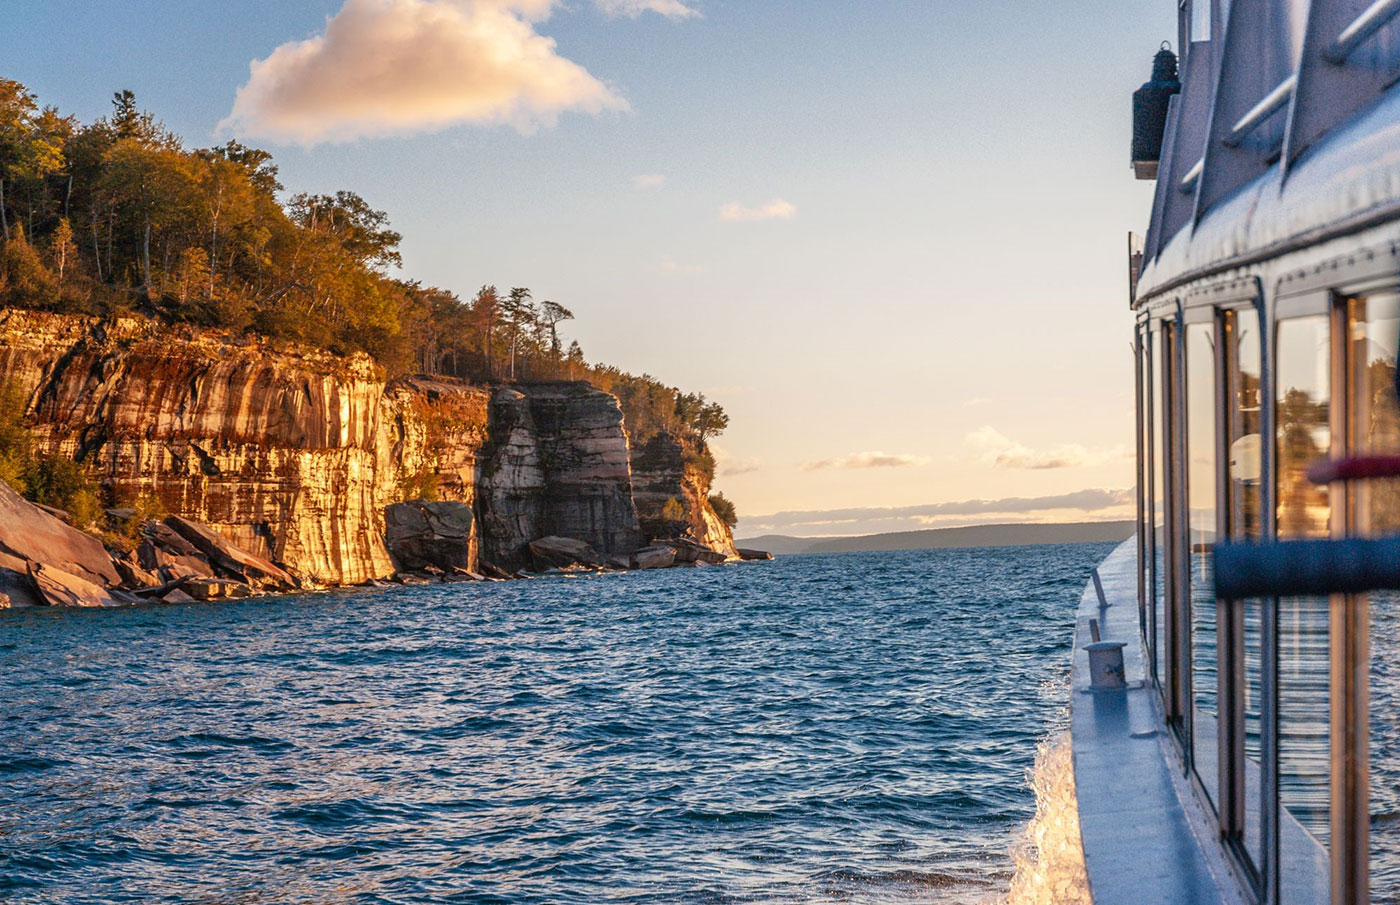 Cruising by the cliffs on a Pictured Rocks Cruises tour